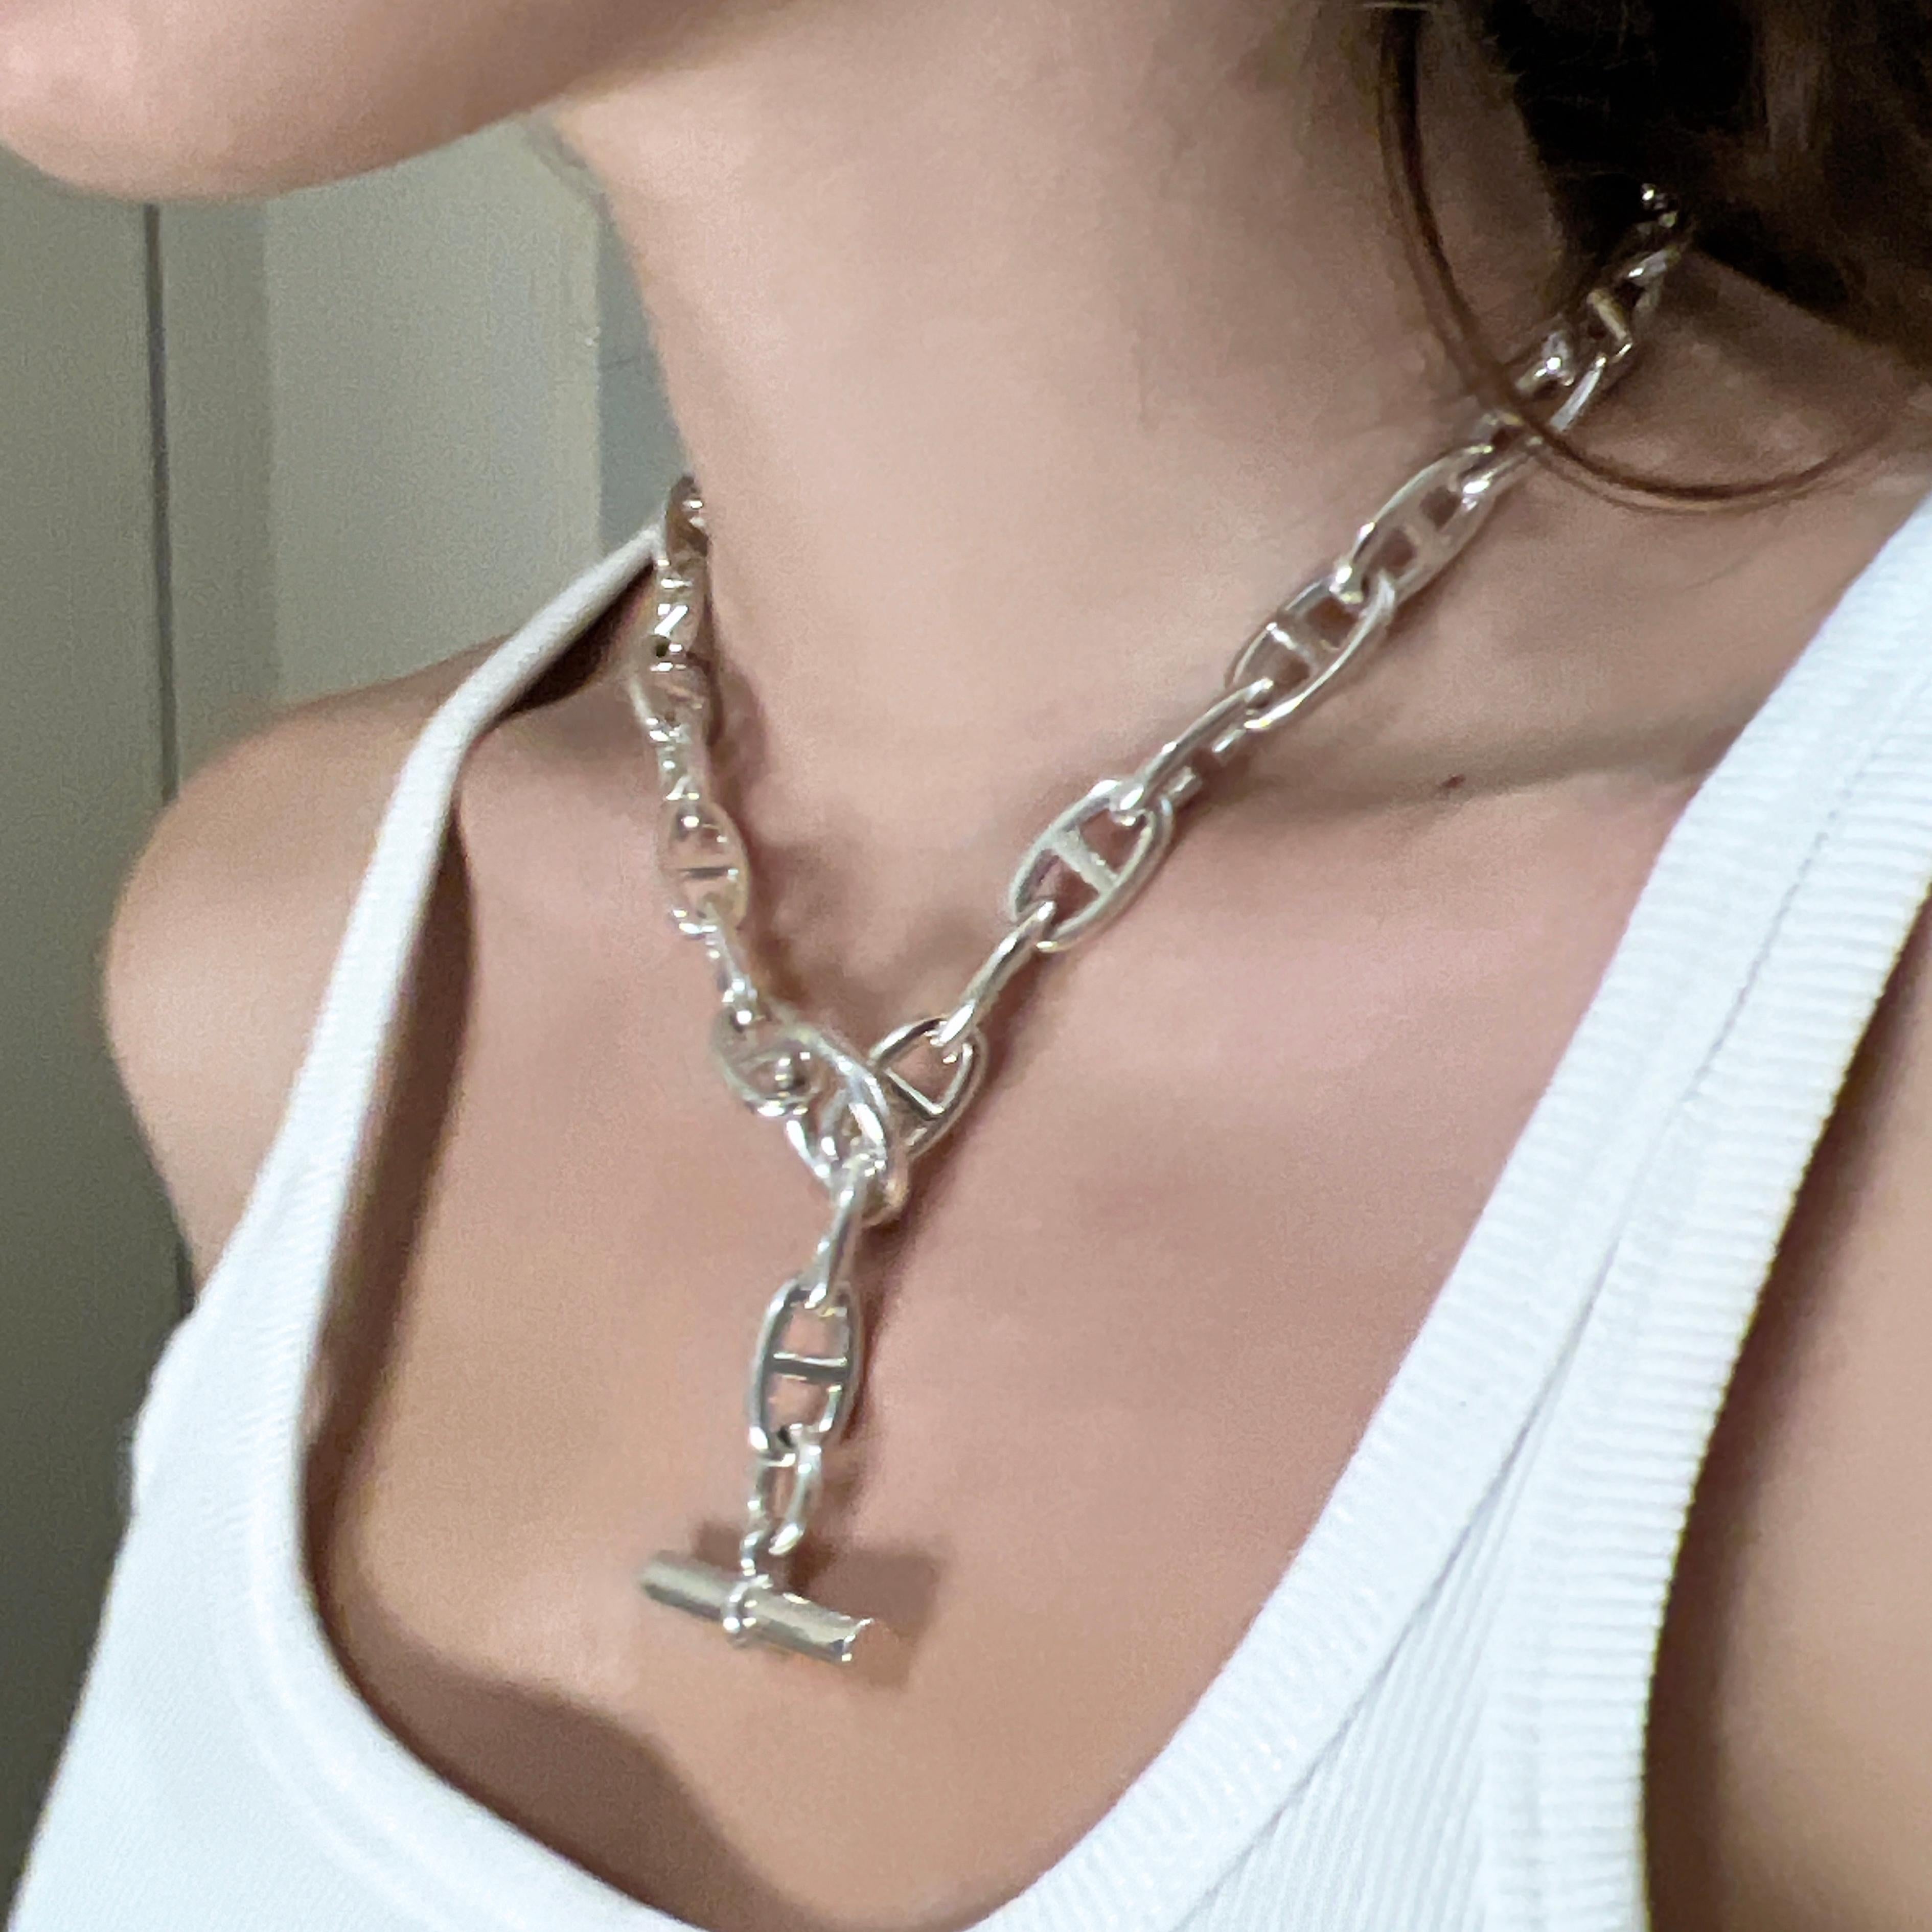 Contemporary Hermès Chaine D'ancre Sterling Silver Necklace, circa 1995